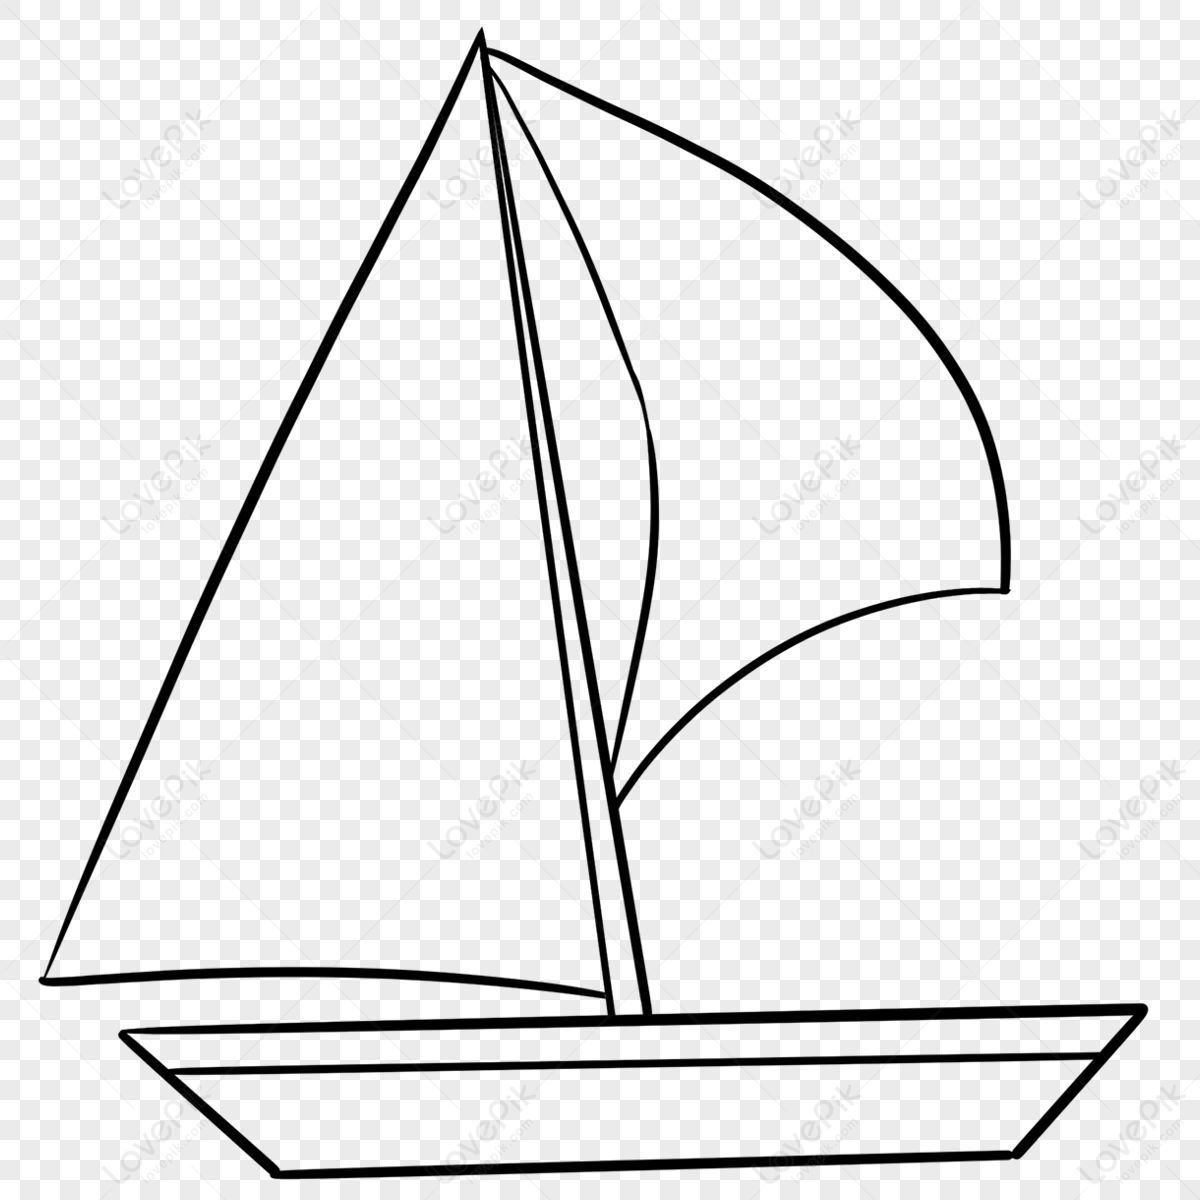 Cute little sailboat clipart black and white,ferry,small sailboat png transparent background